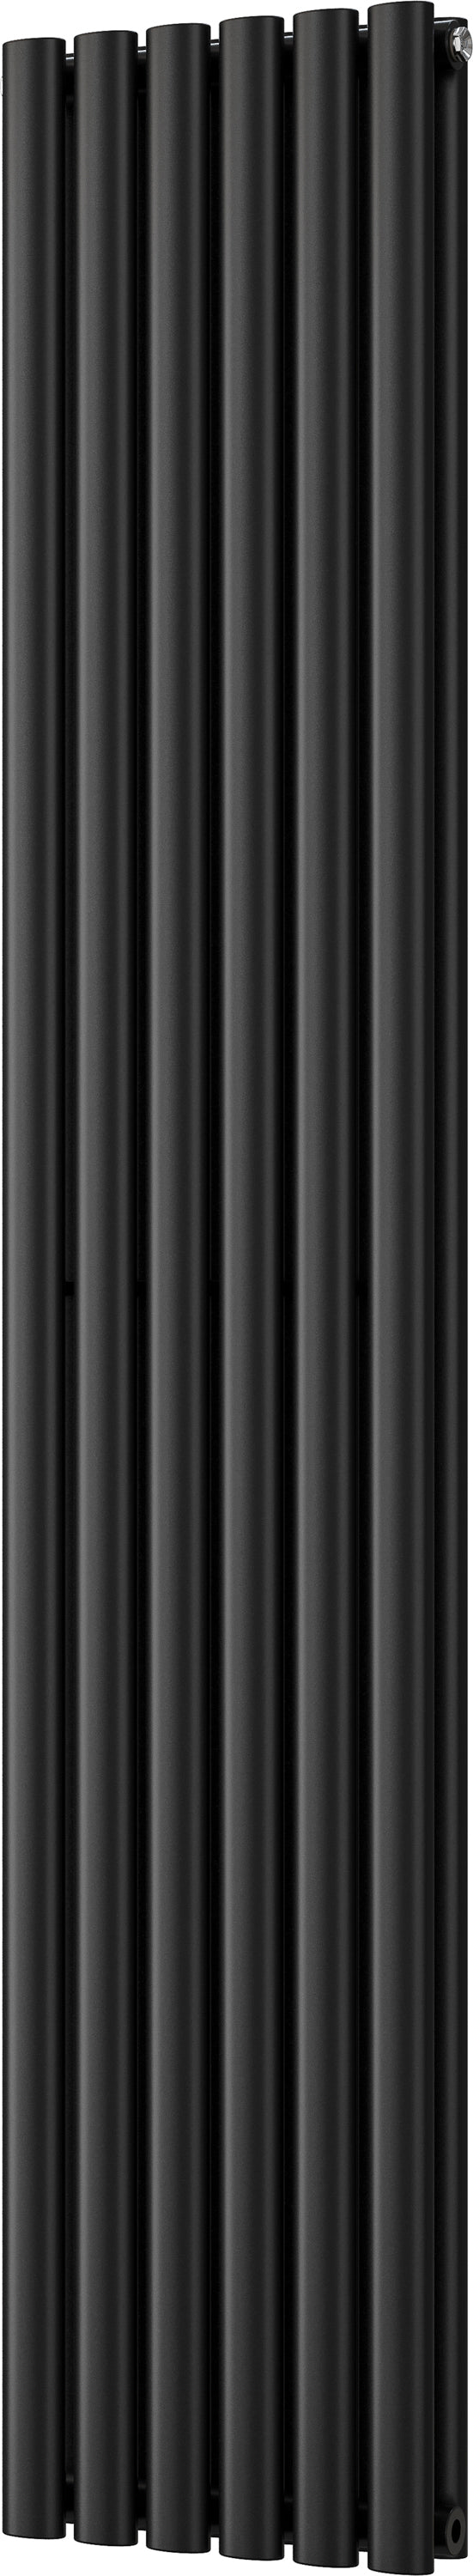 Omeara - Black Vertical Radiator H1800mm x W348mm Double Panel